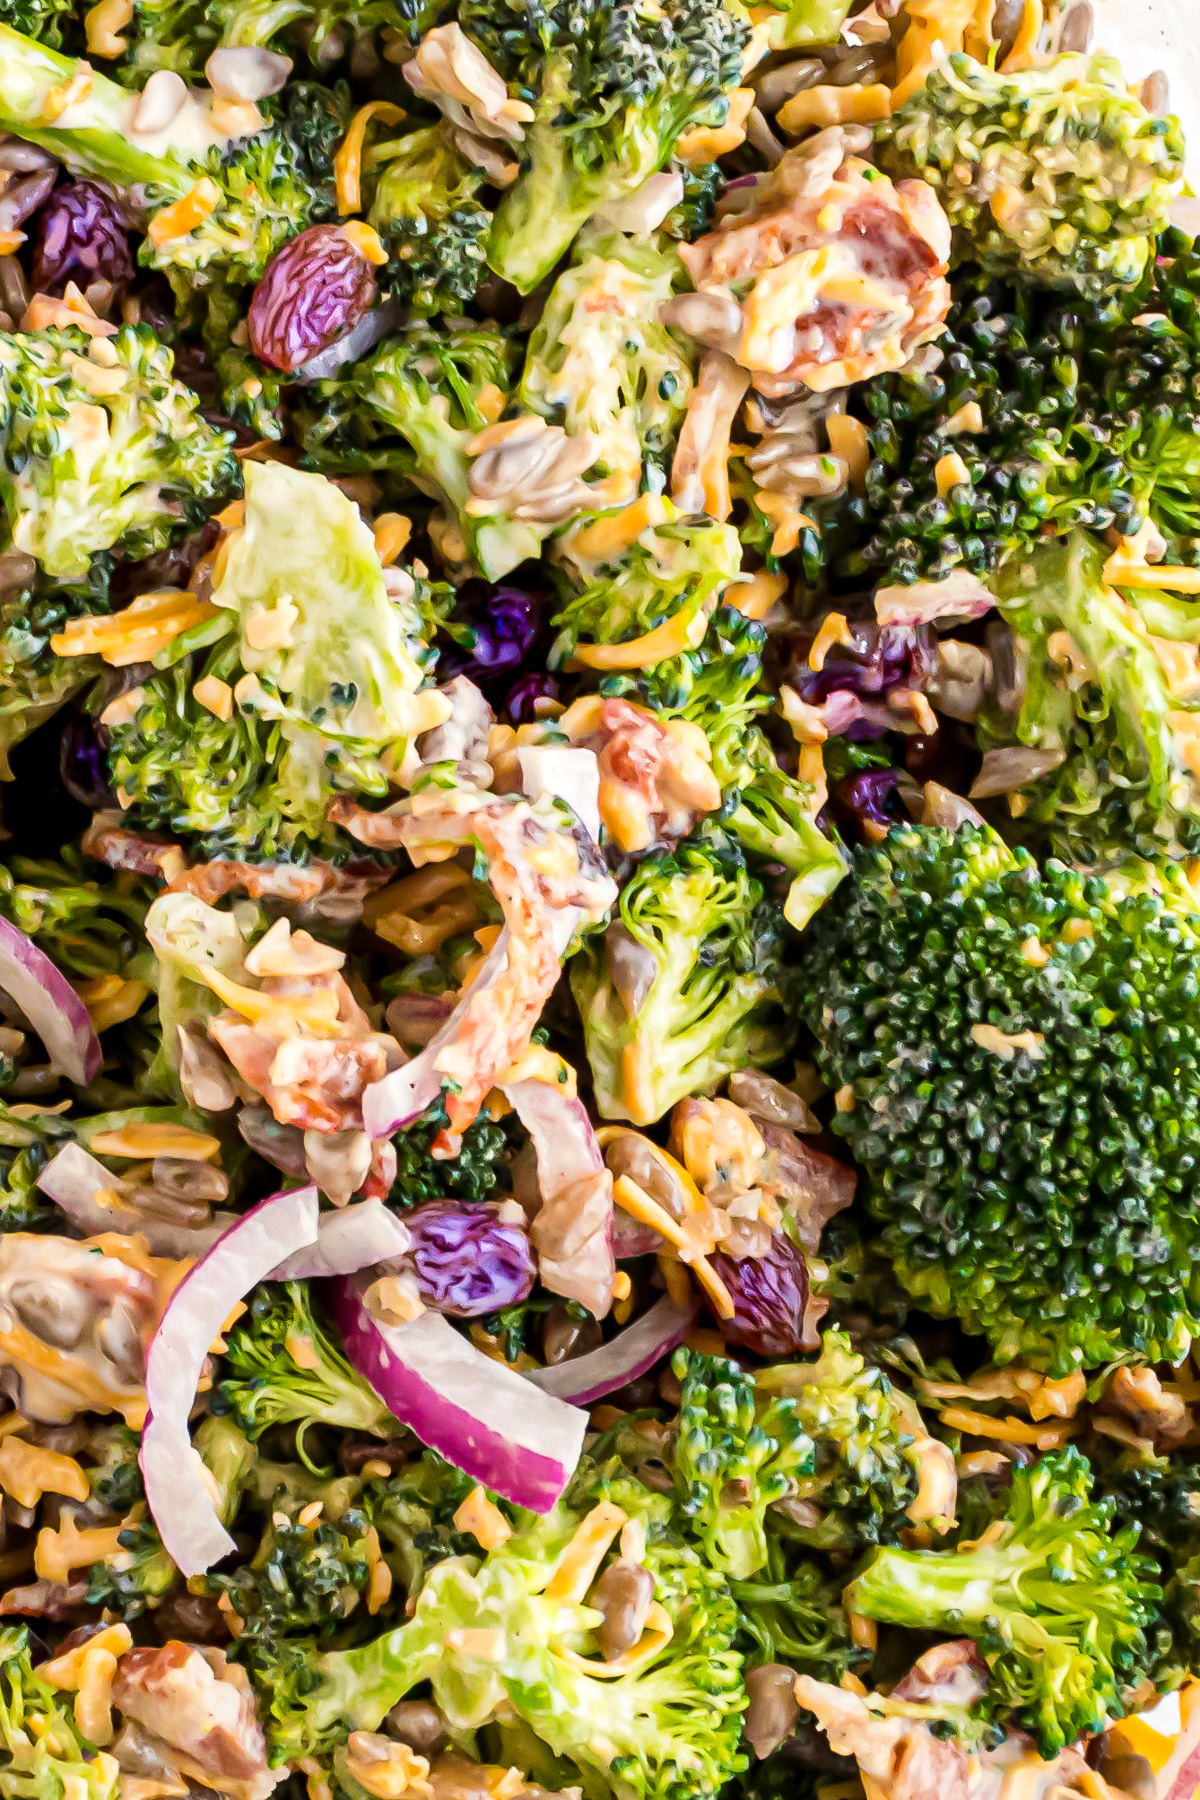 A very, up-close photo of the broccoli salad showing the texture of the broccoli florets, the crumbled bacon, cheese, onions, and Craisins, all coated with creamy salad dressing.